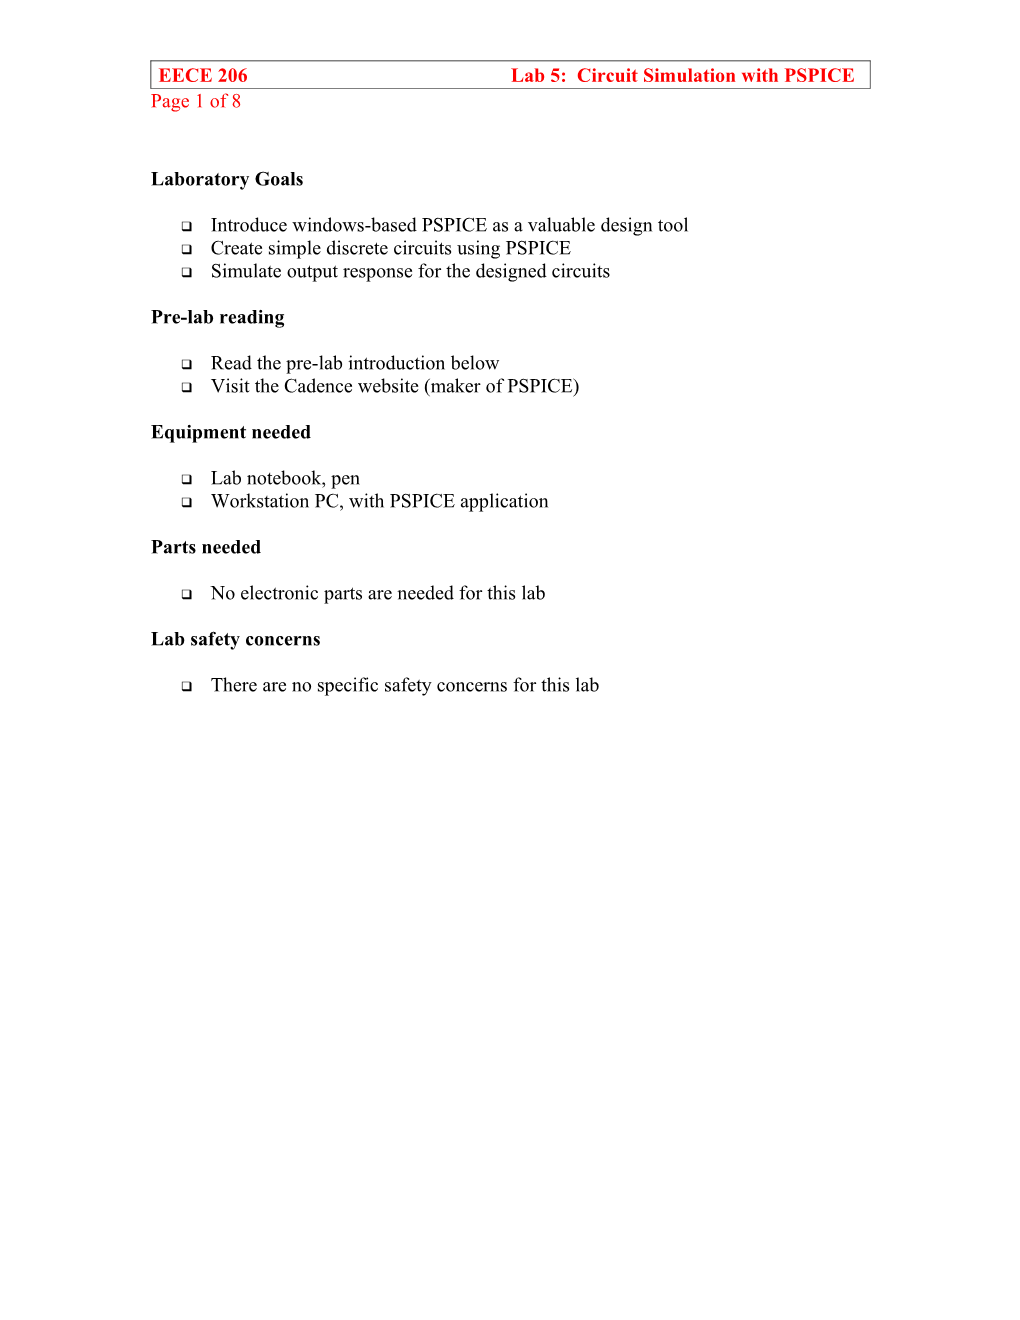 Outline for Laboratory Template